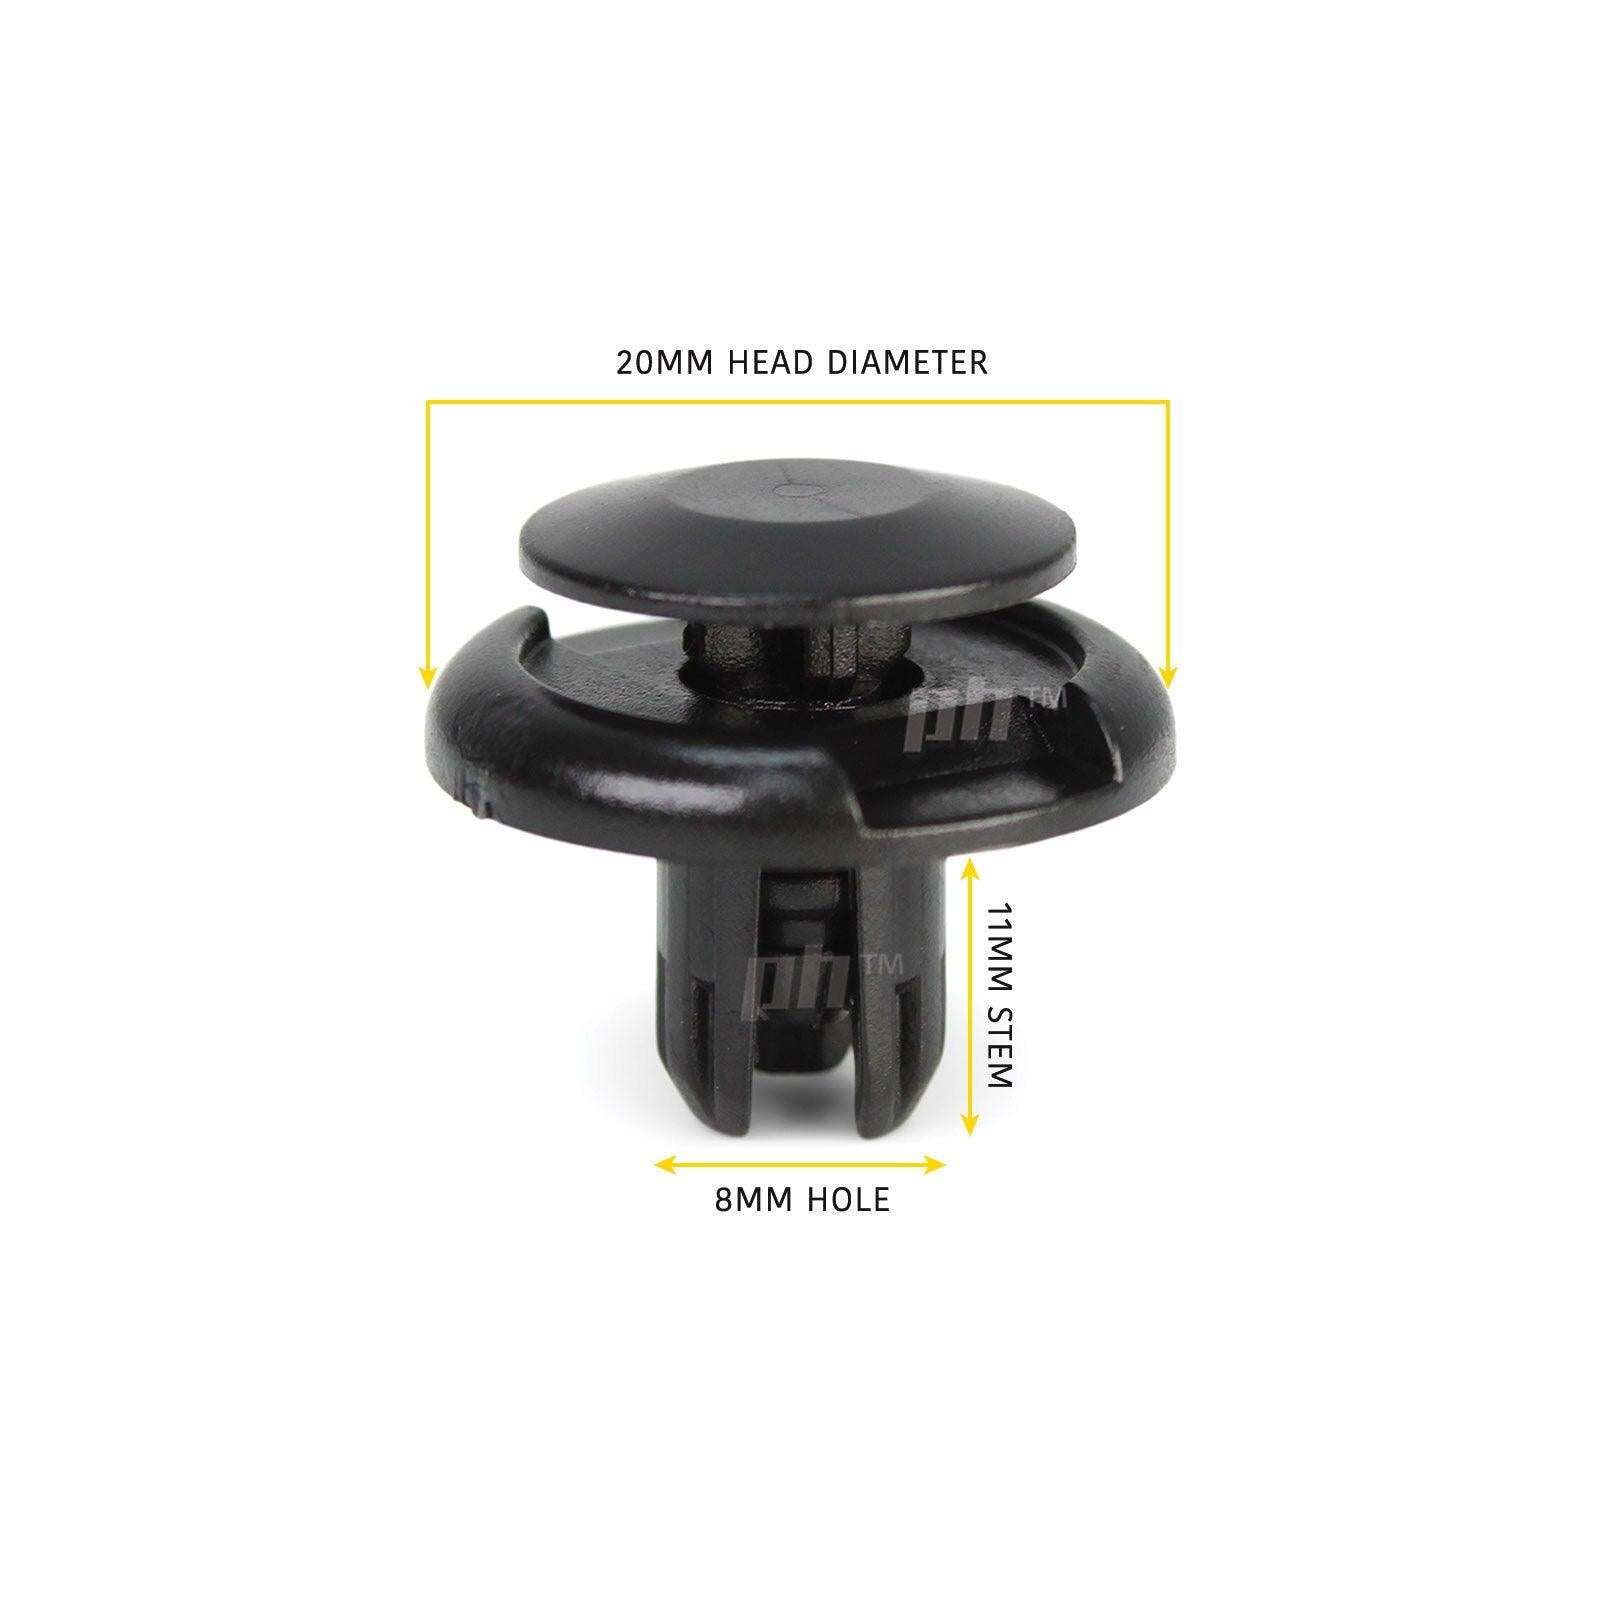 Panel House - Push In Retainer Clip x10 8mm Hole Type fits Honda Models - 4X4OC™ | 4x4 Offroad Centre